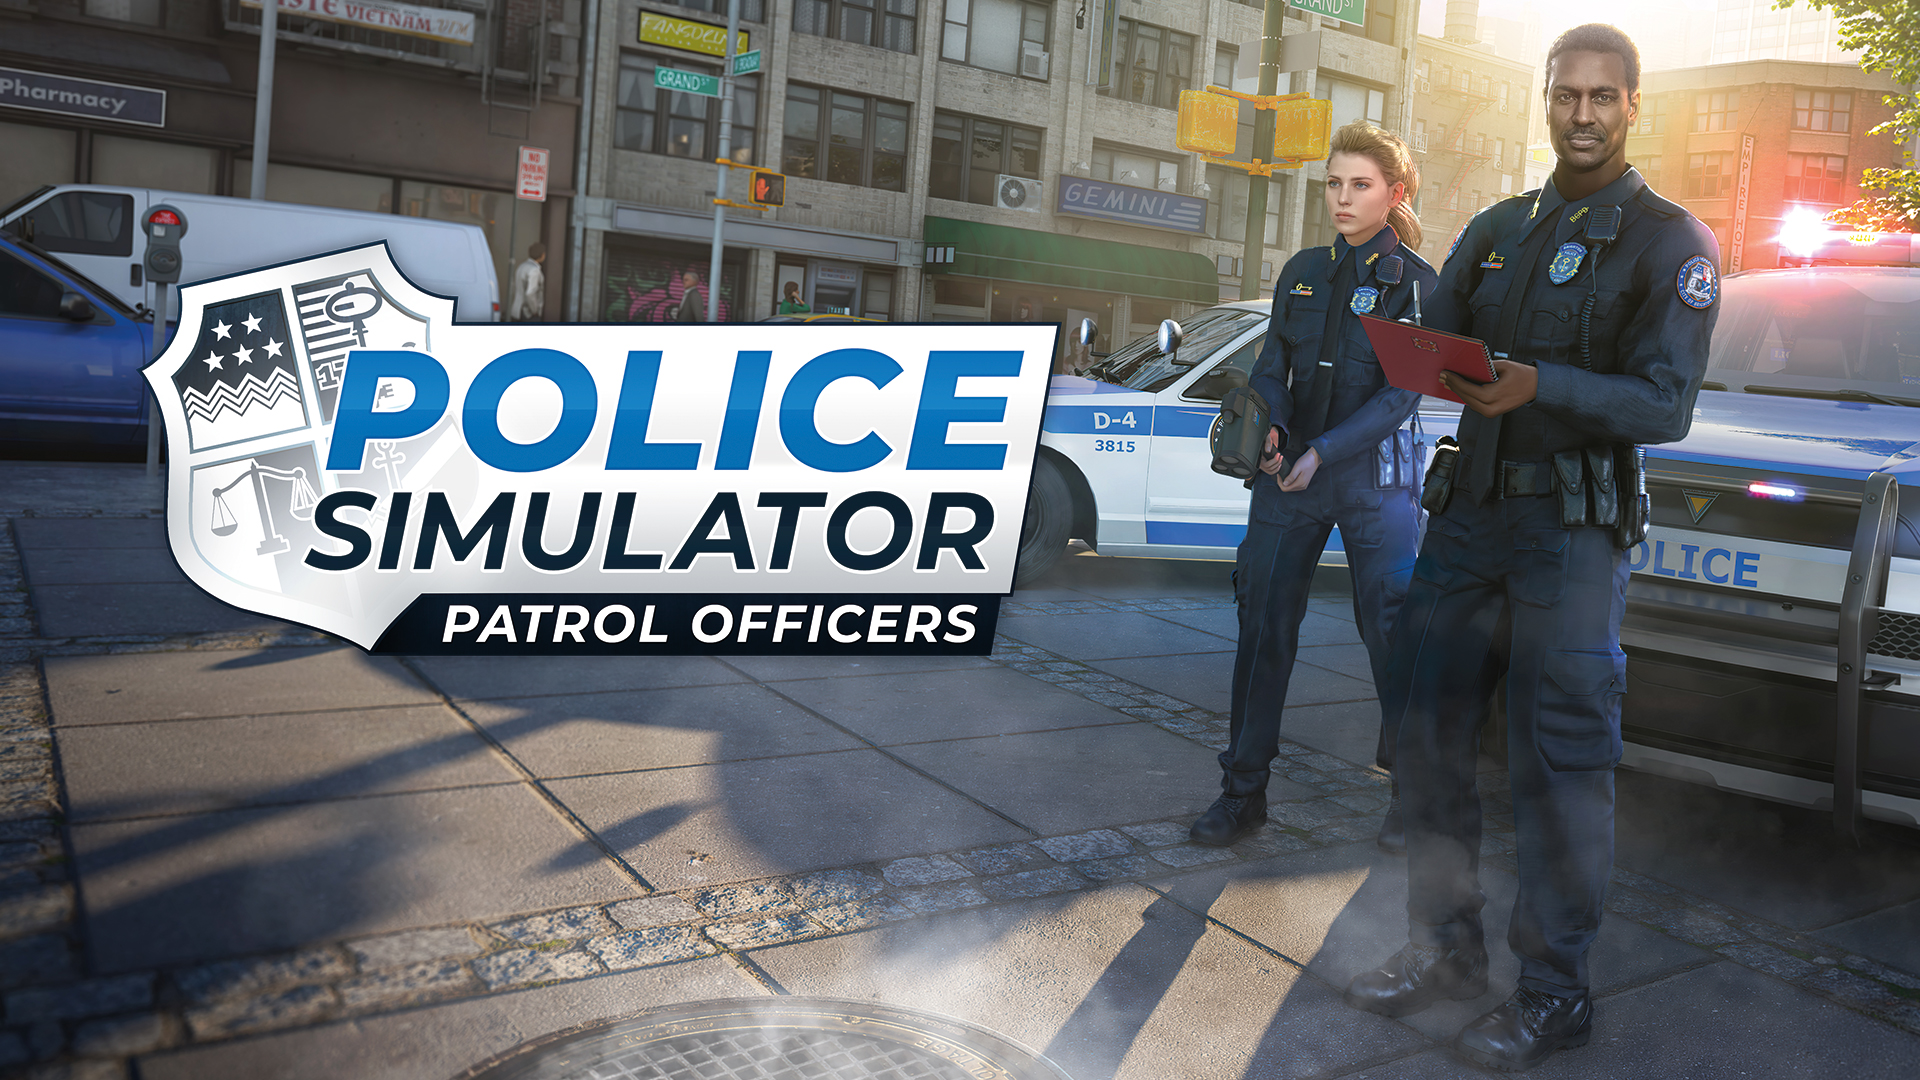 Police Simulator: Patrol Officers gets new updates